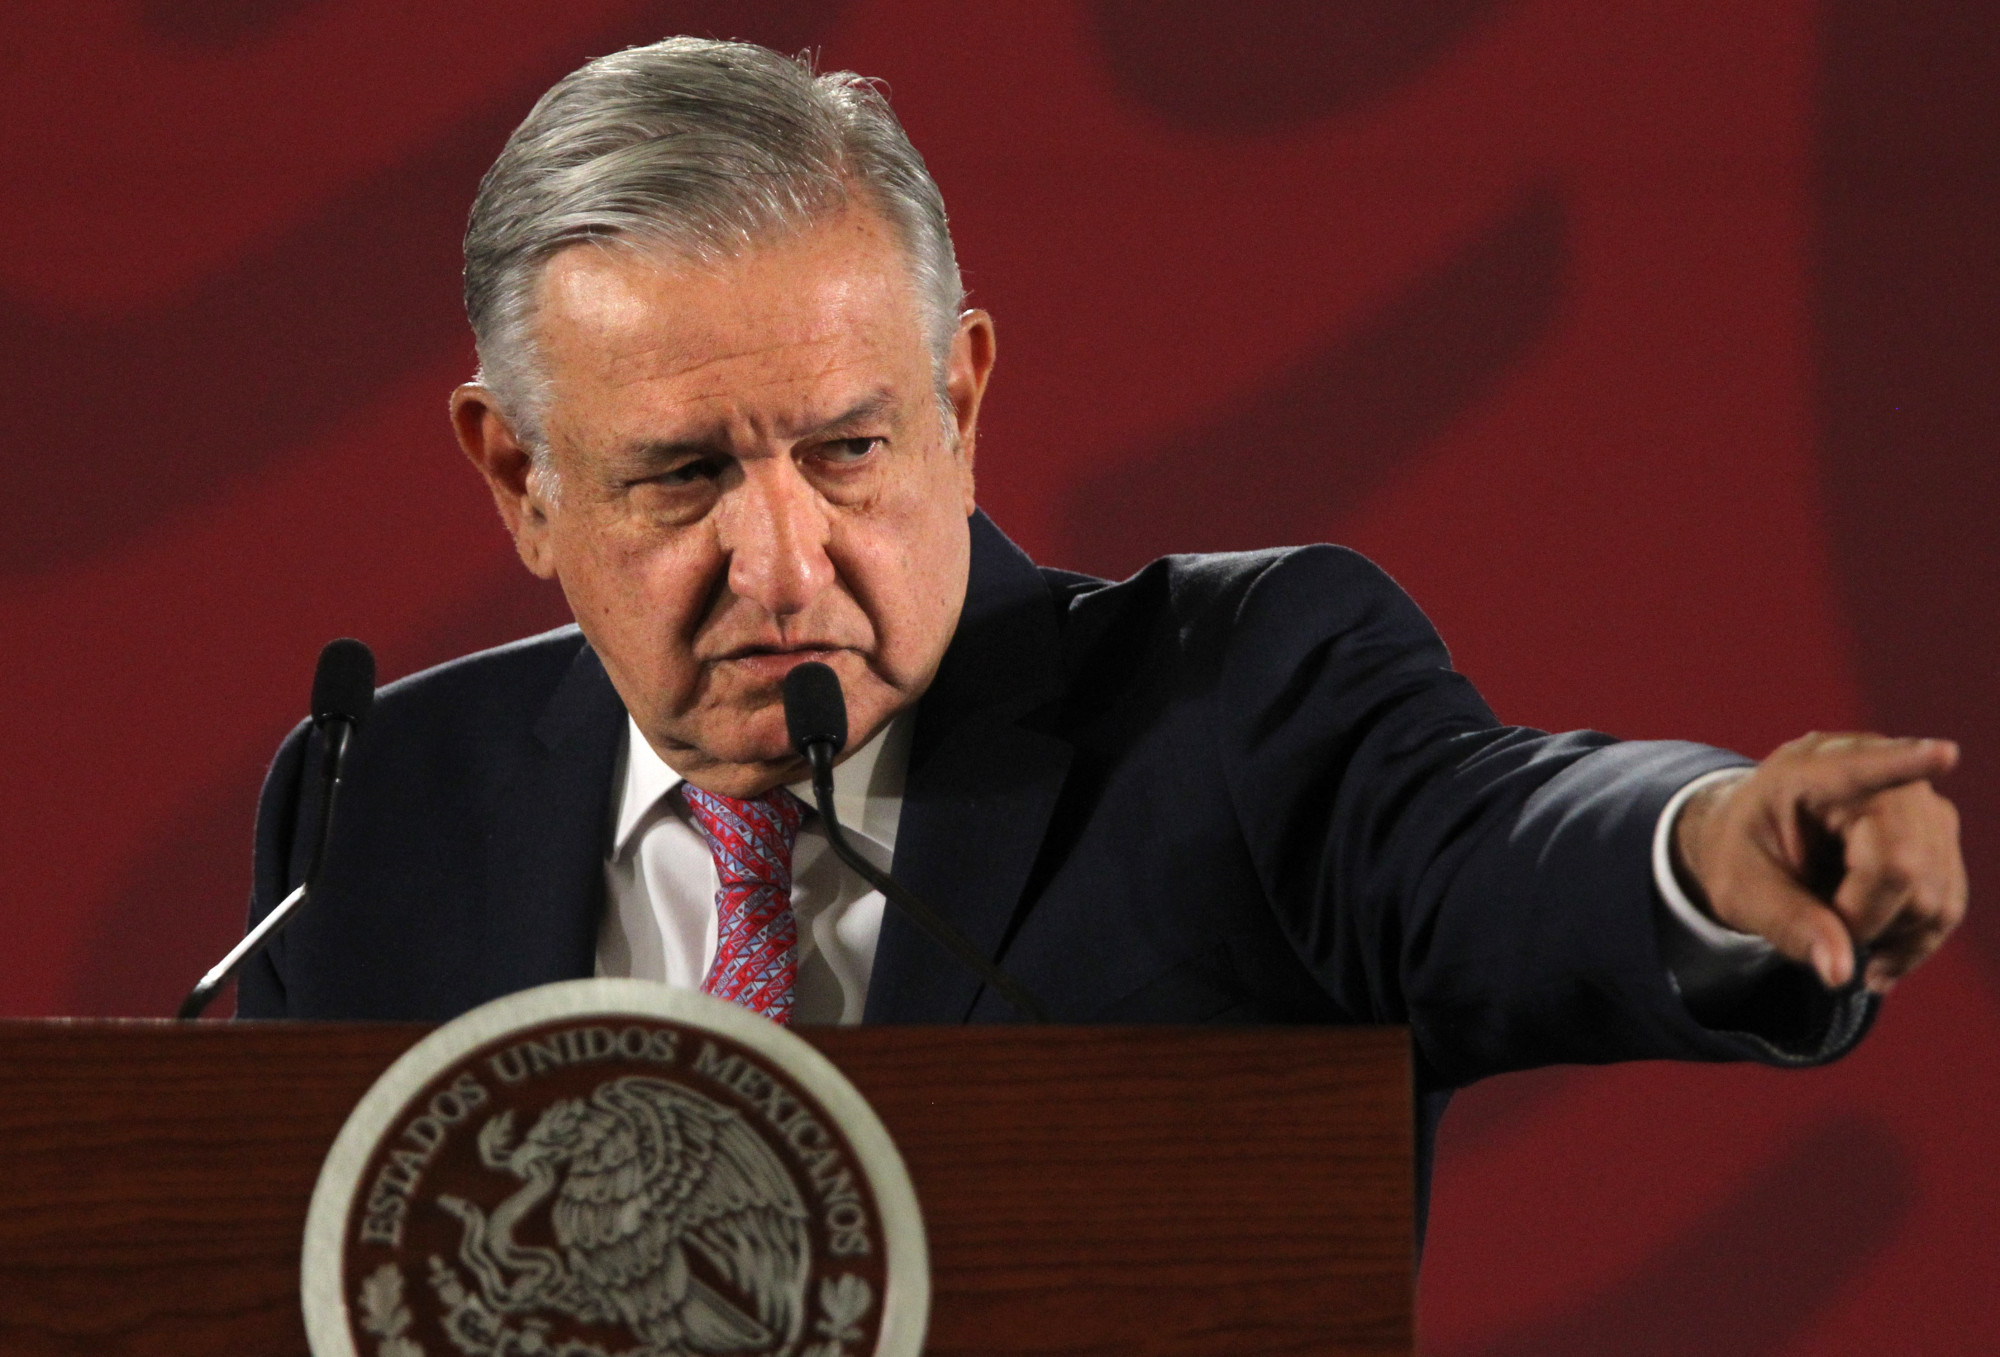 Andrés Manuel López Obrador during the morning conference at the National Palace